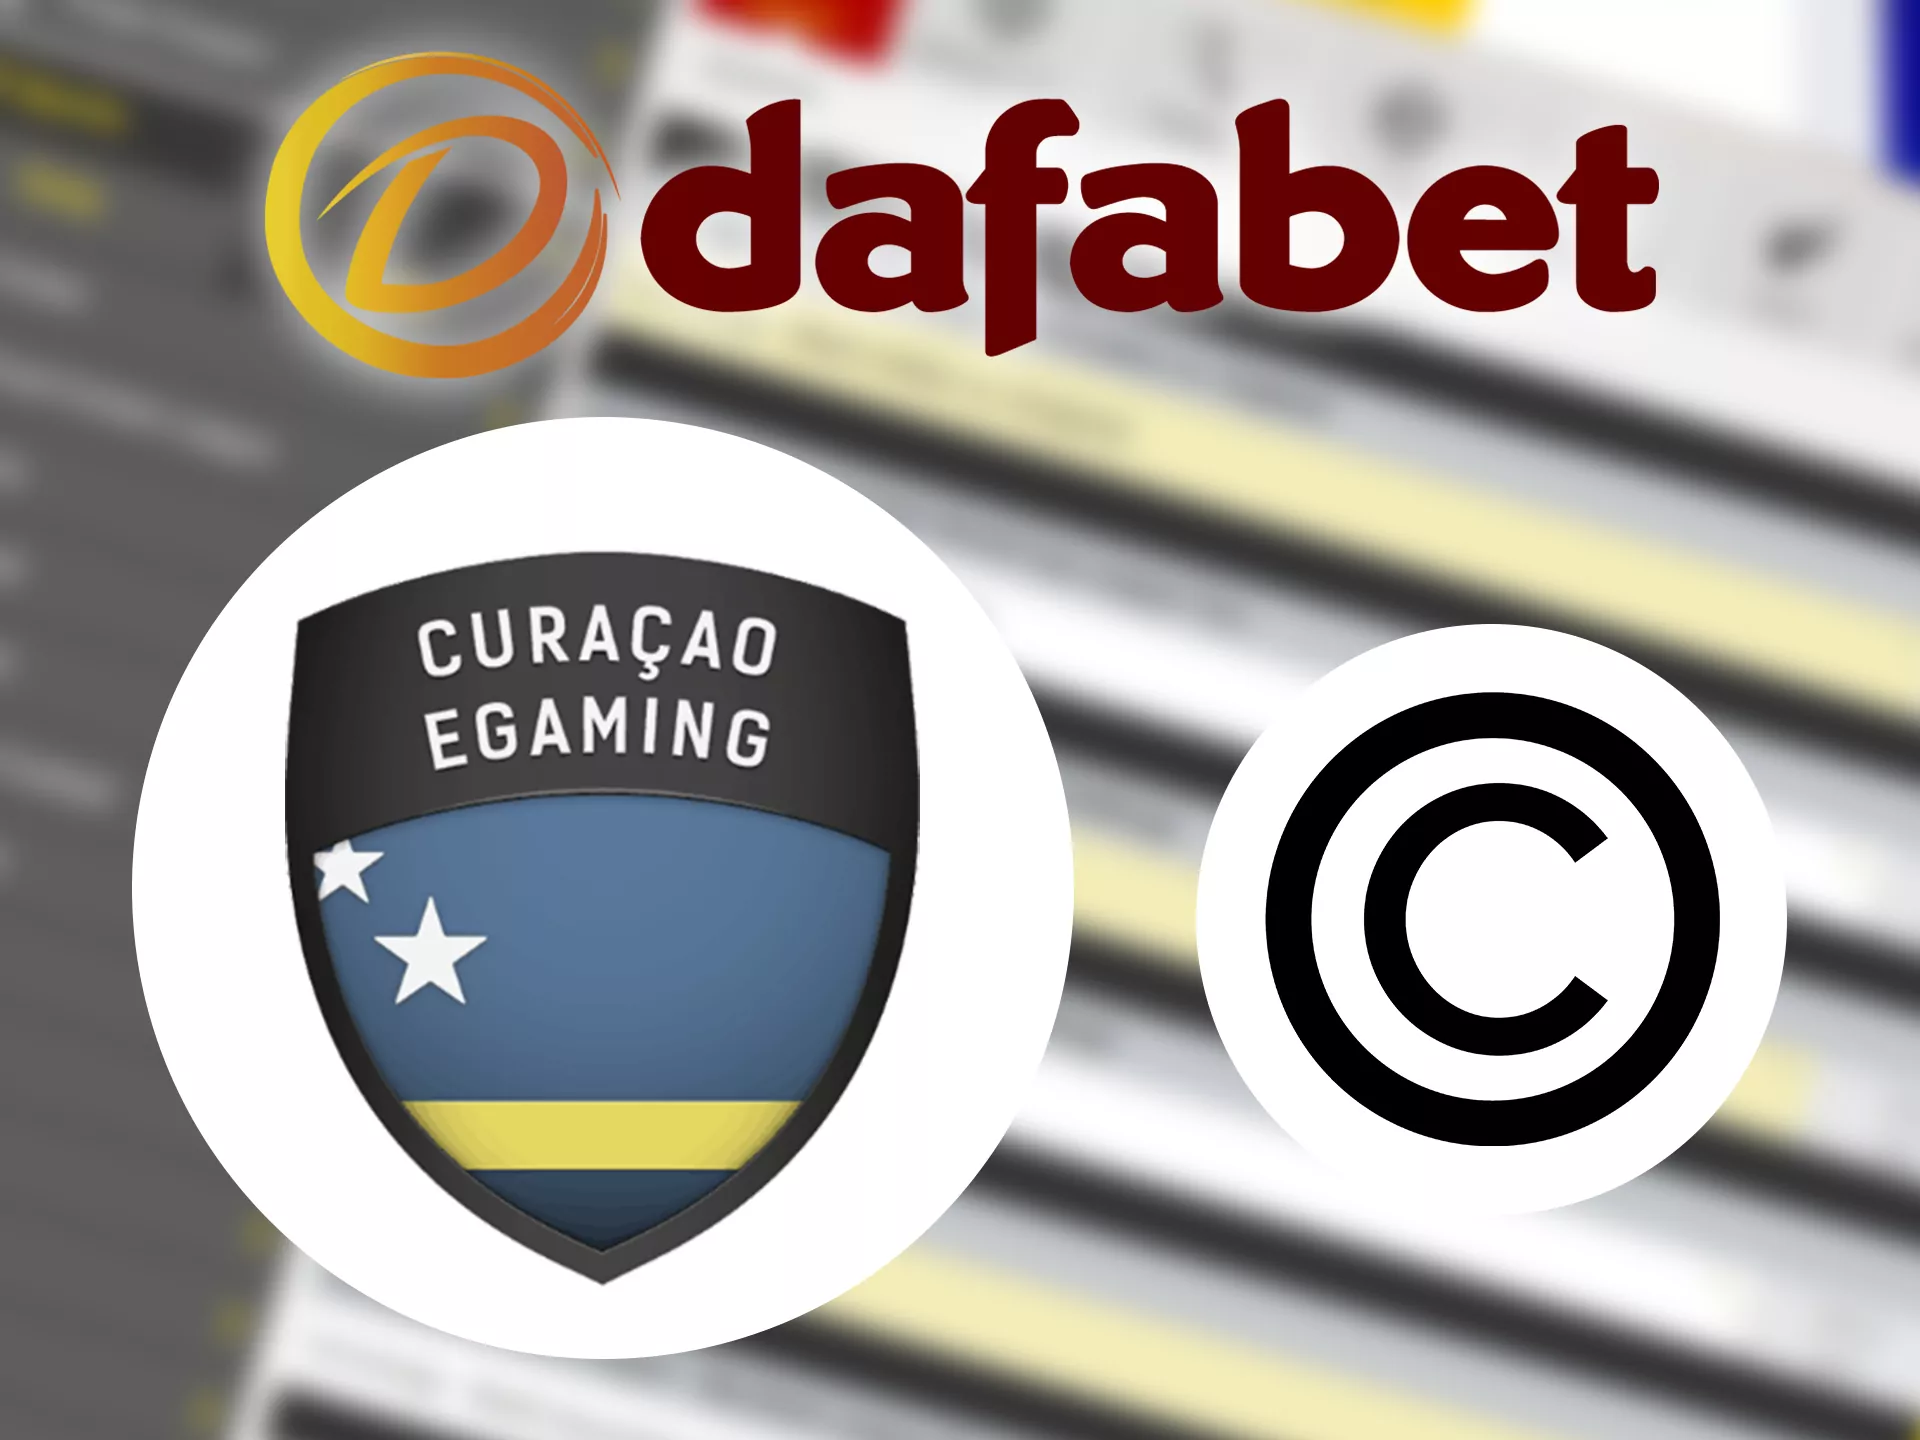 Dafabet follow's all of the copyrights.